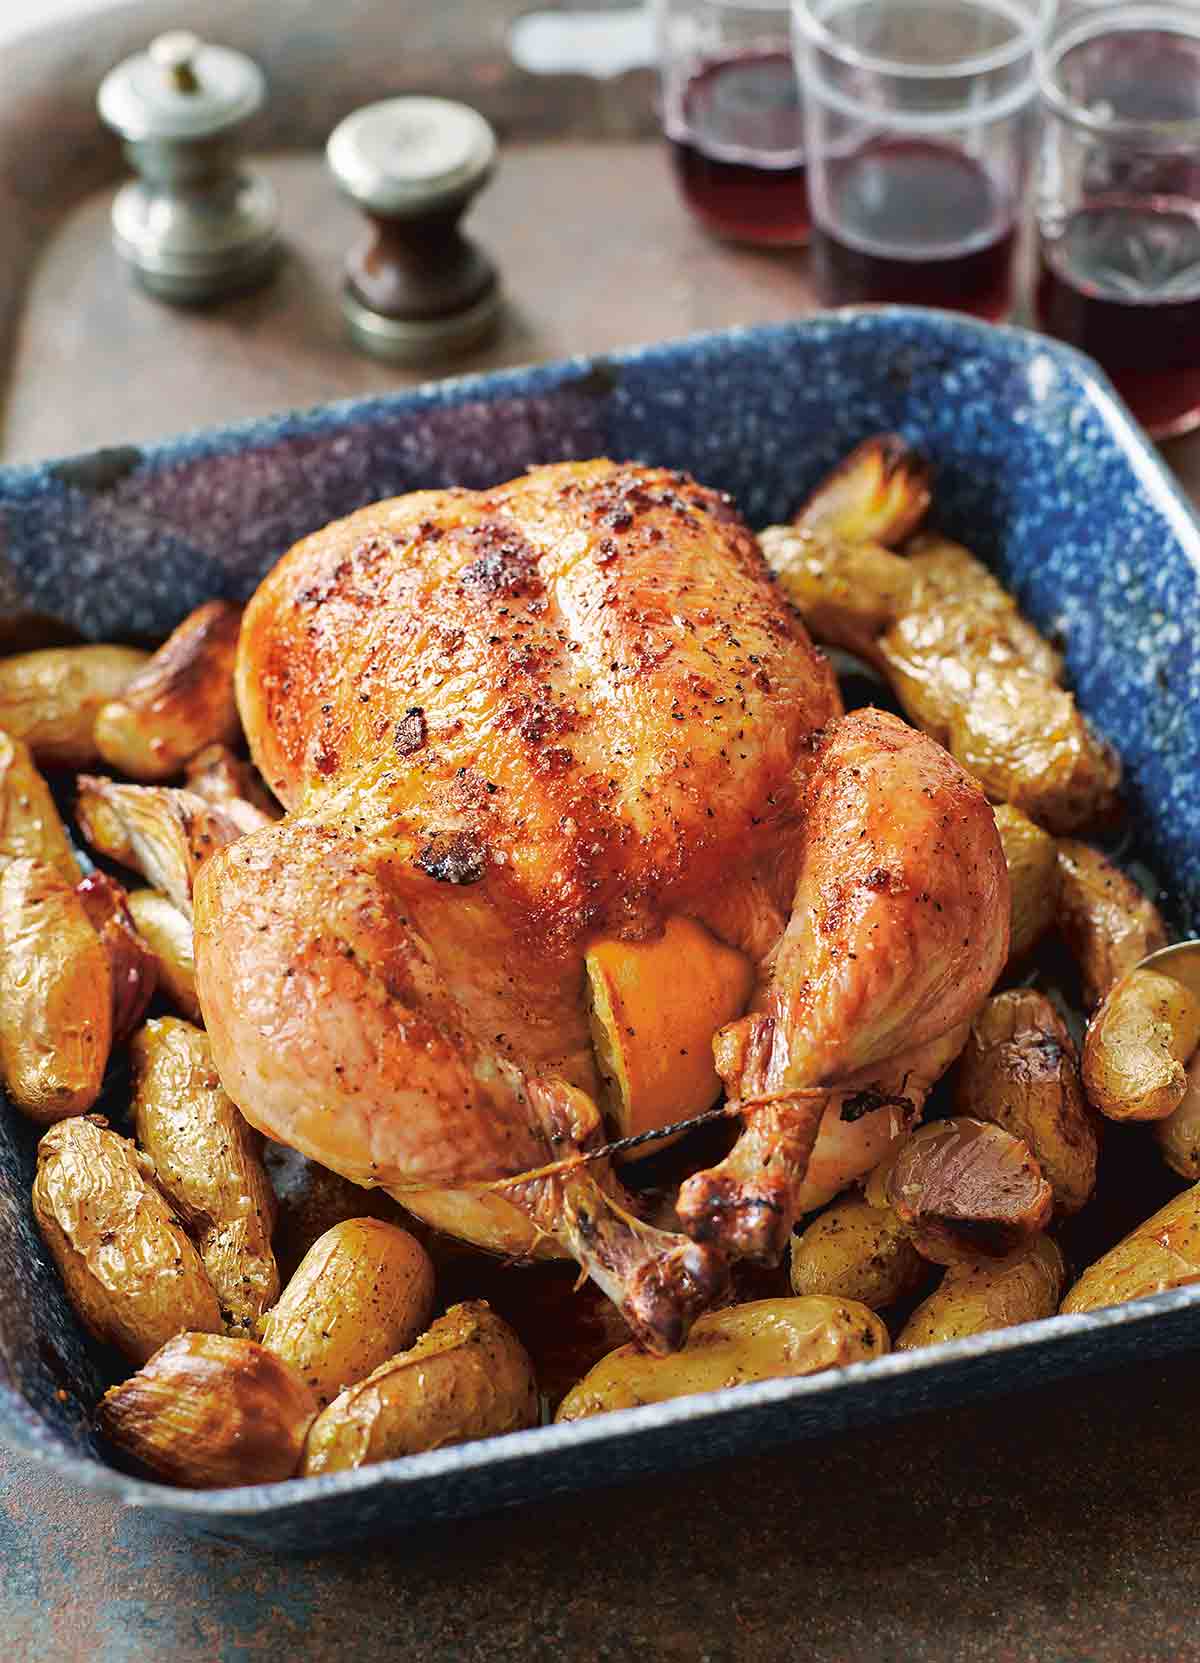 A blue enamel roast pan with a maple roast chicken, trussed and stuffed with lemon halves, sitting on a bed of fingerling potatoes. Glasses of red wine and salt and pepper in the background.